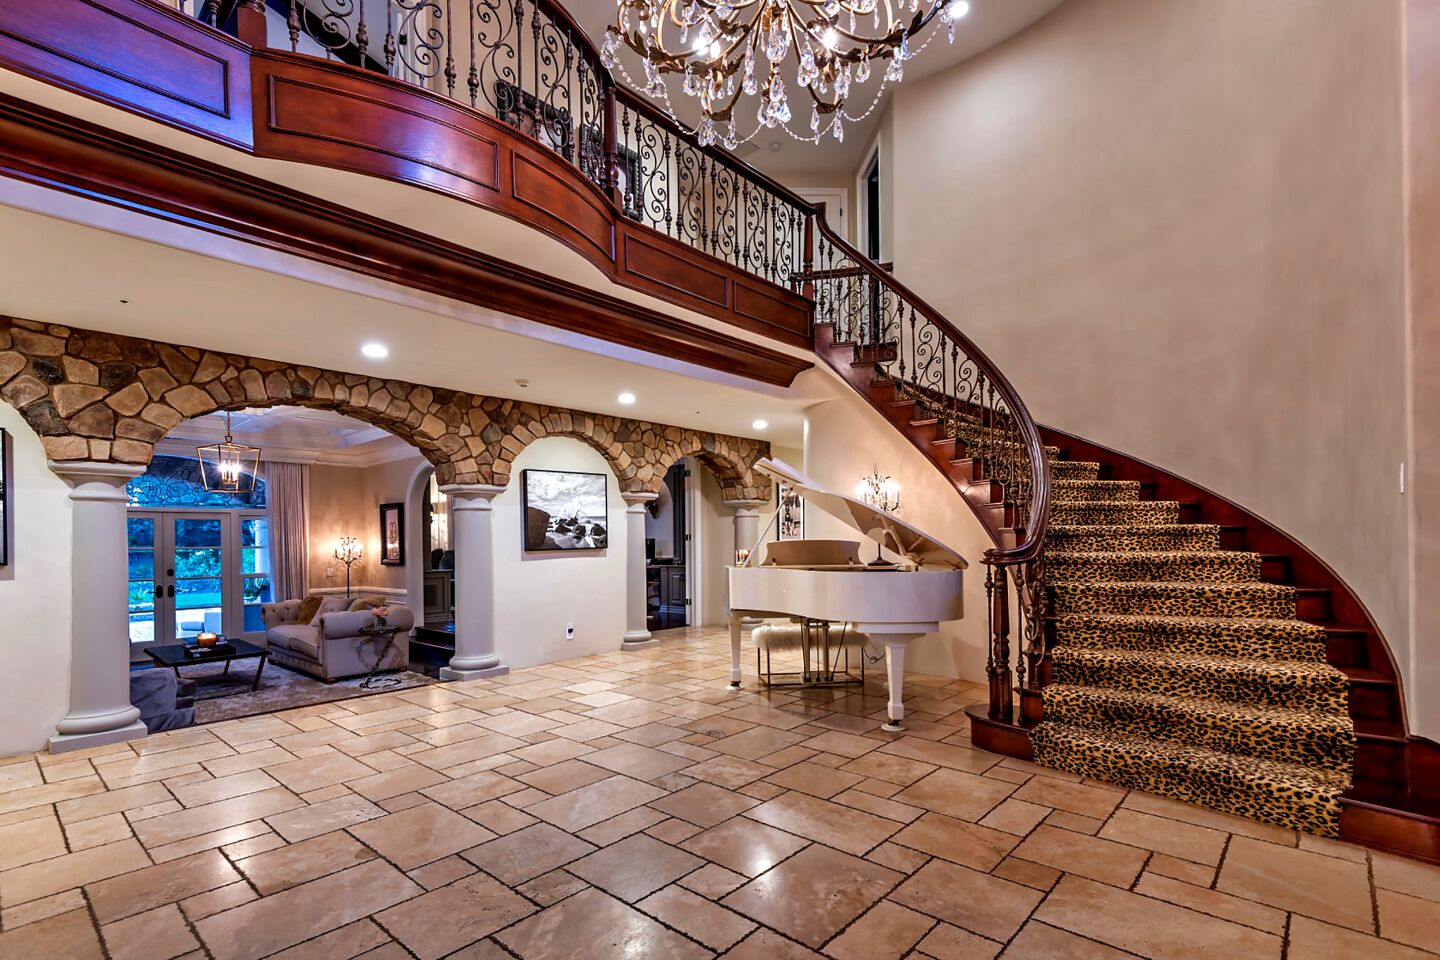 A chandelier and sweeping staircase anchor the two-story foyer.